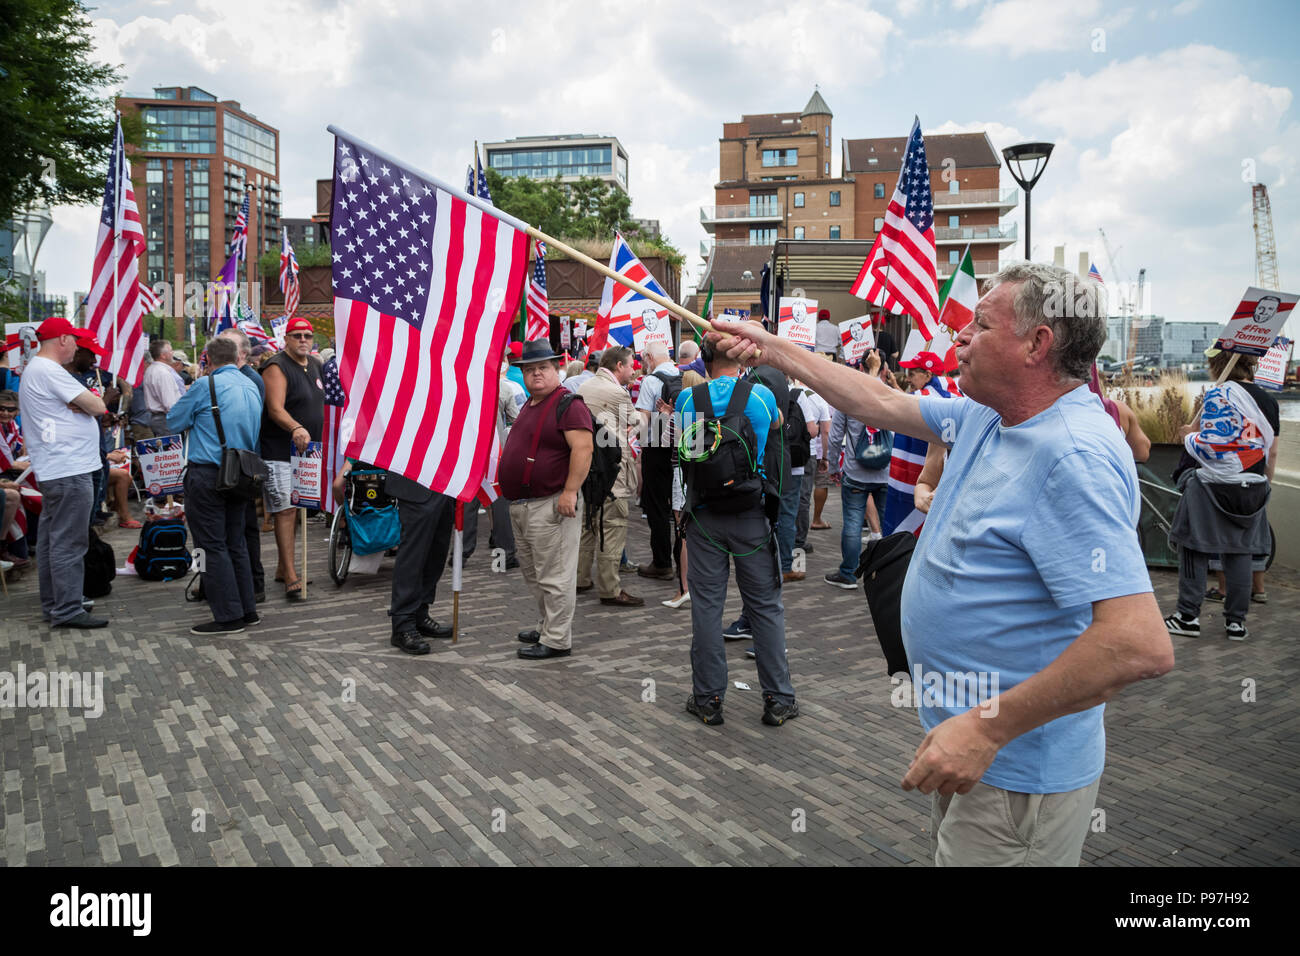 London, UK. 14th July 2018. Pro-Trump supporters gather near the US Embassy in London to celebrate the visit of the 45th President of the United States to UK. Credit: Guy Corbishley/Alamy Live News Stock Photo